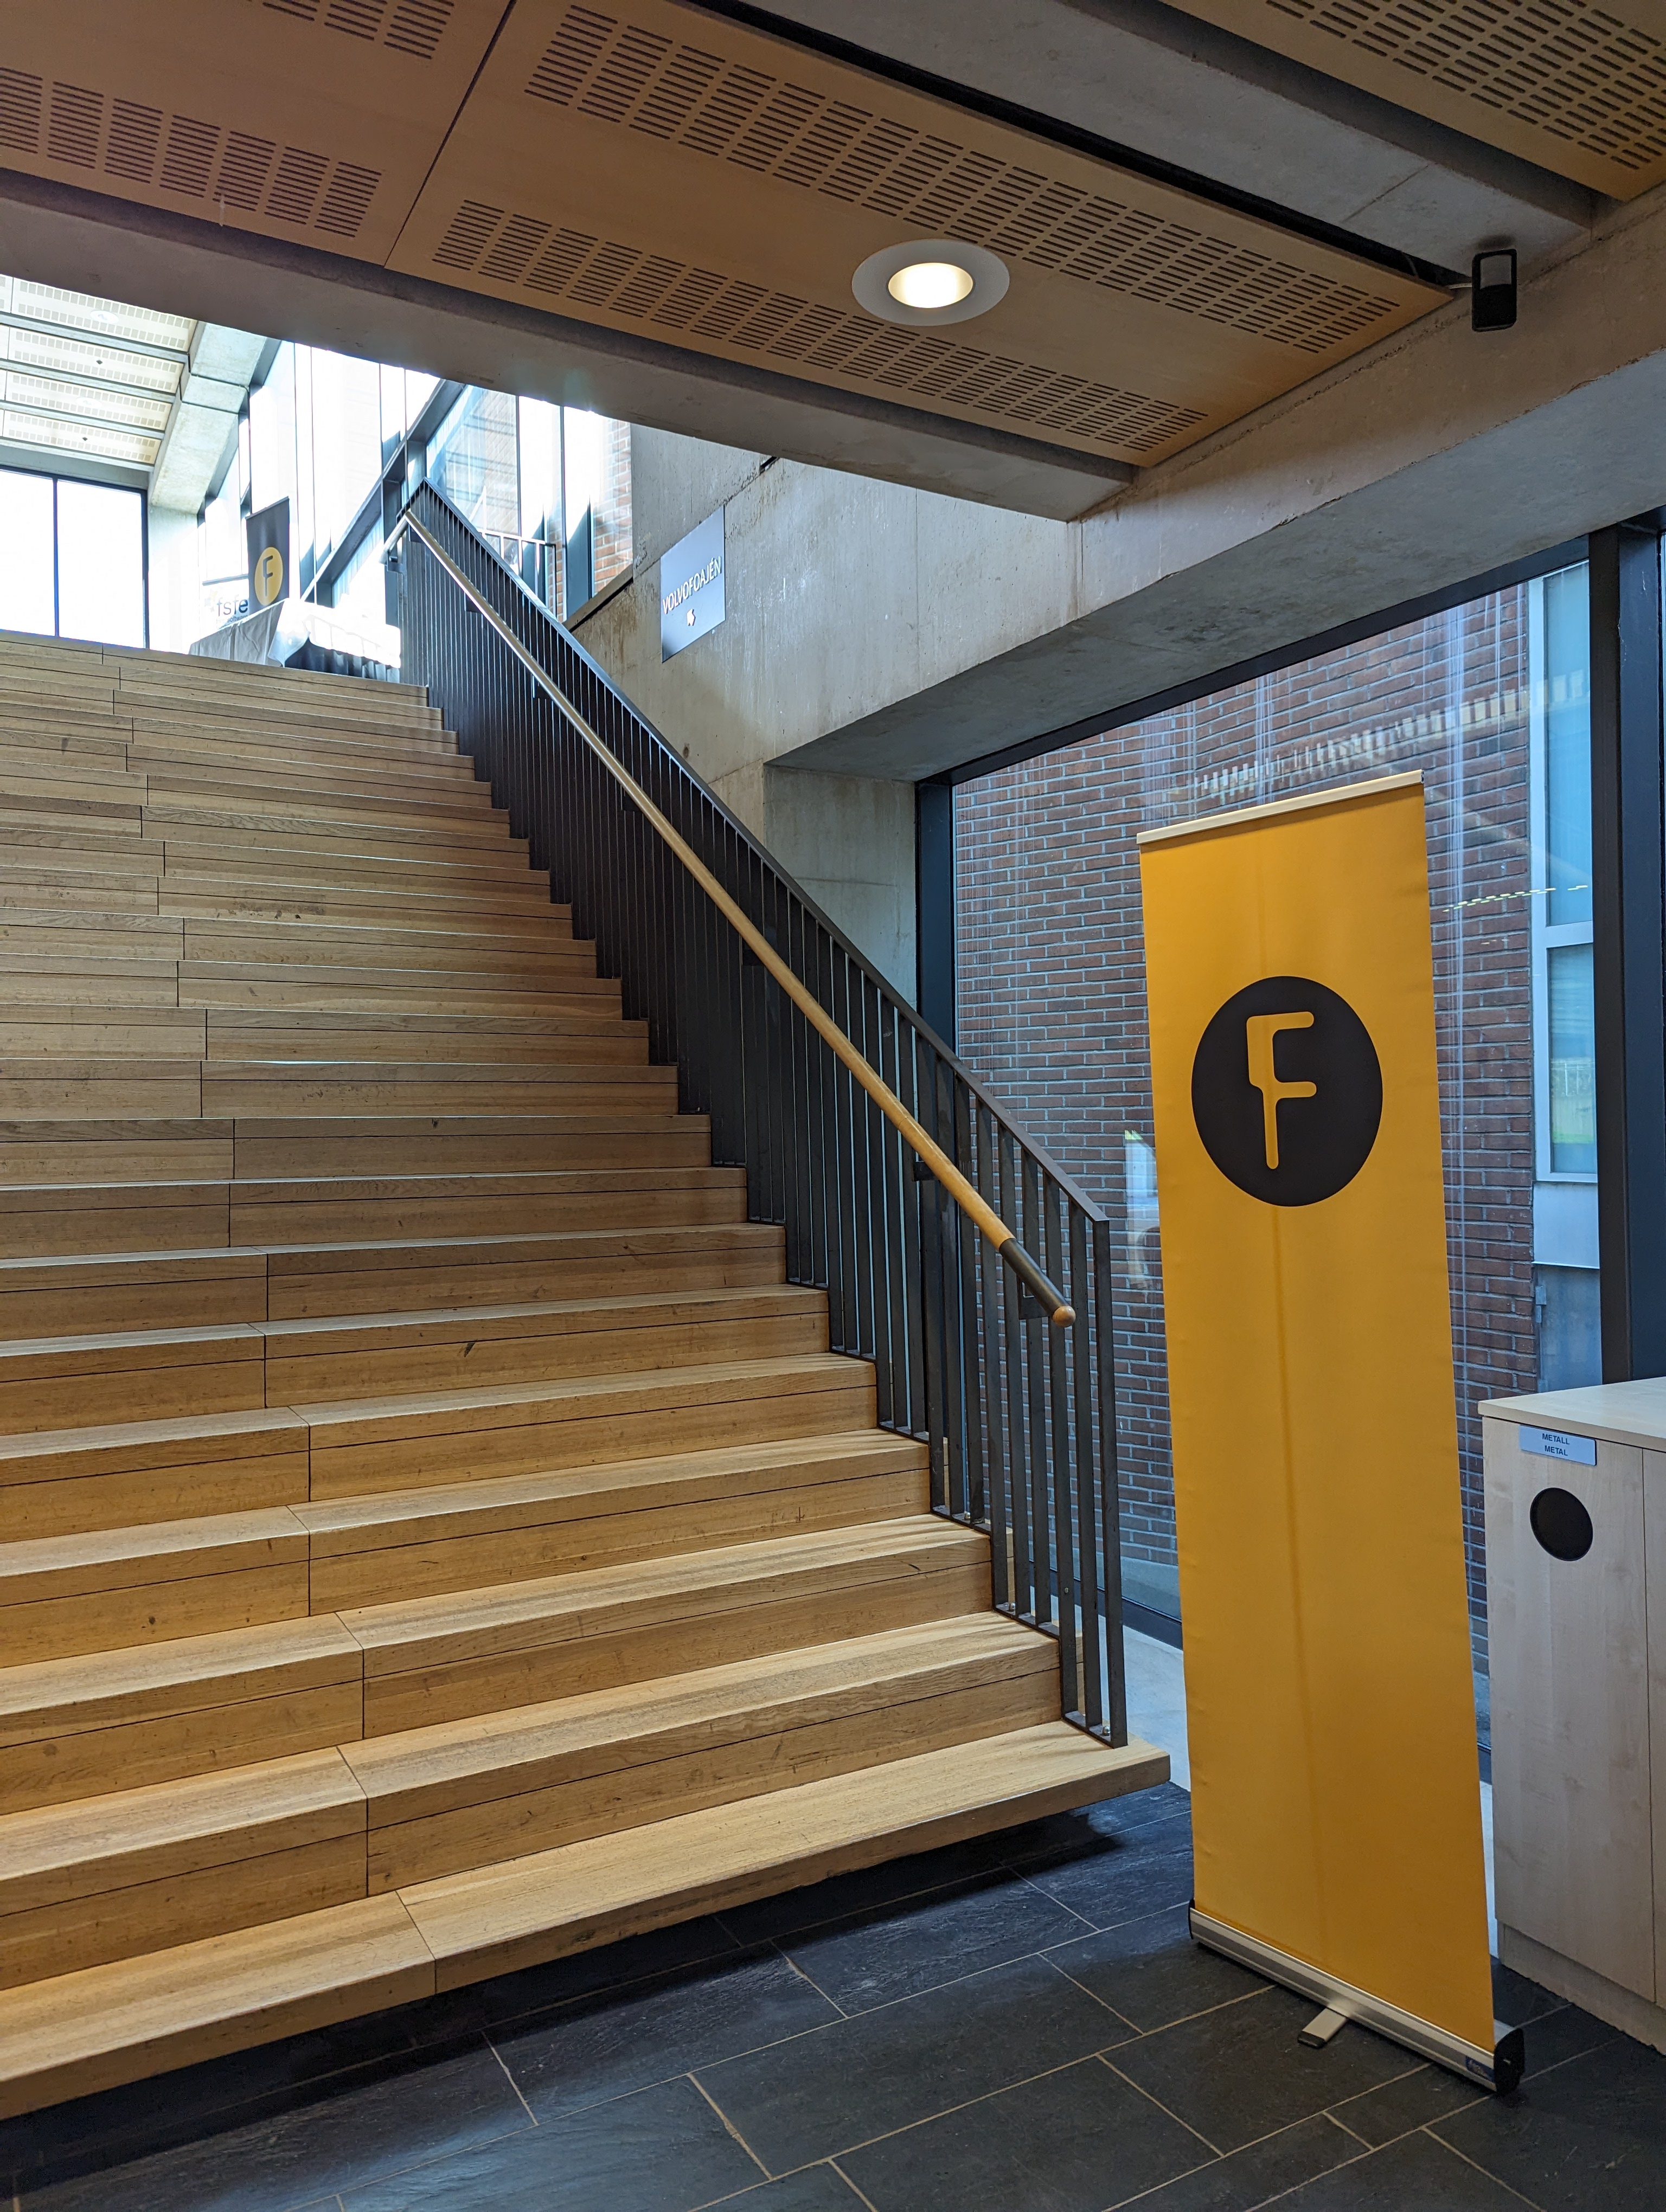 Picture showing the venue with stairs going up to the main hall and a sign with the foss-north logo.